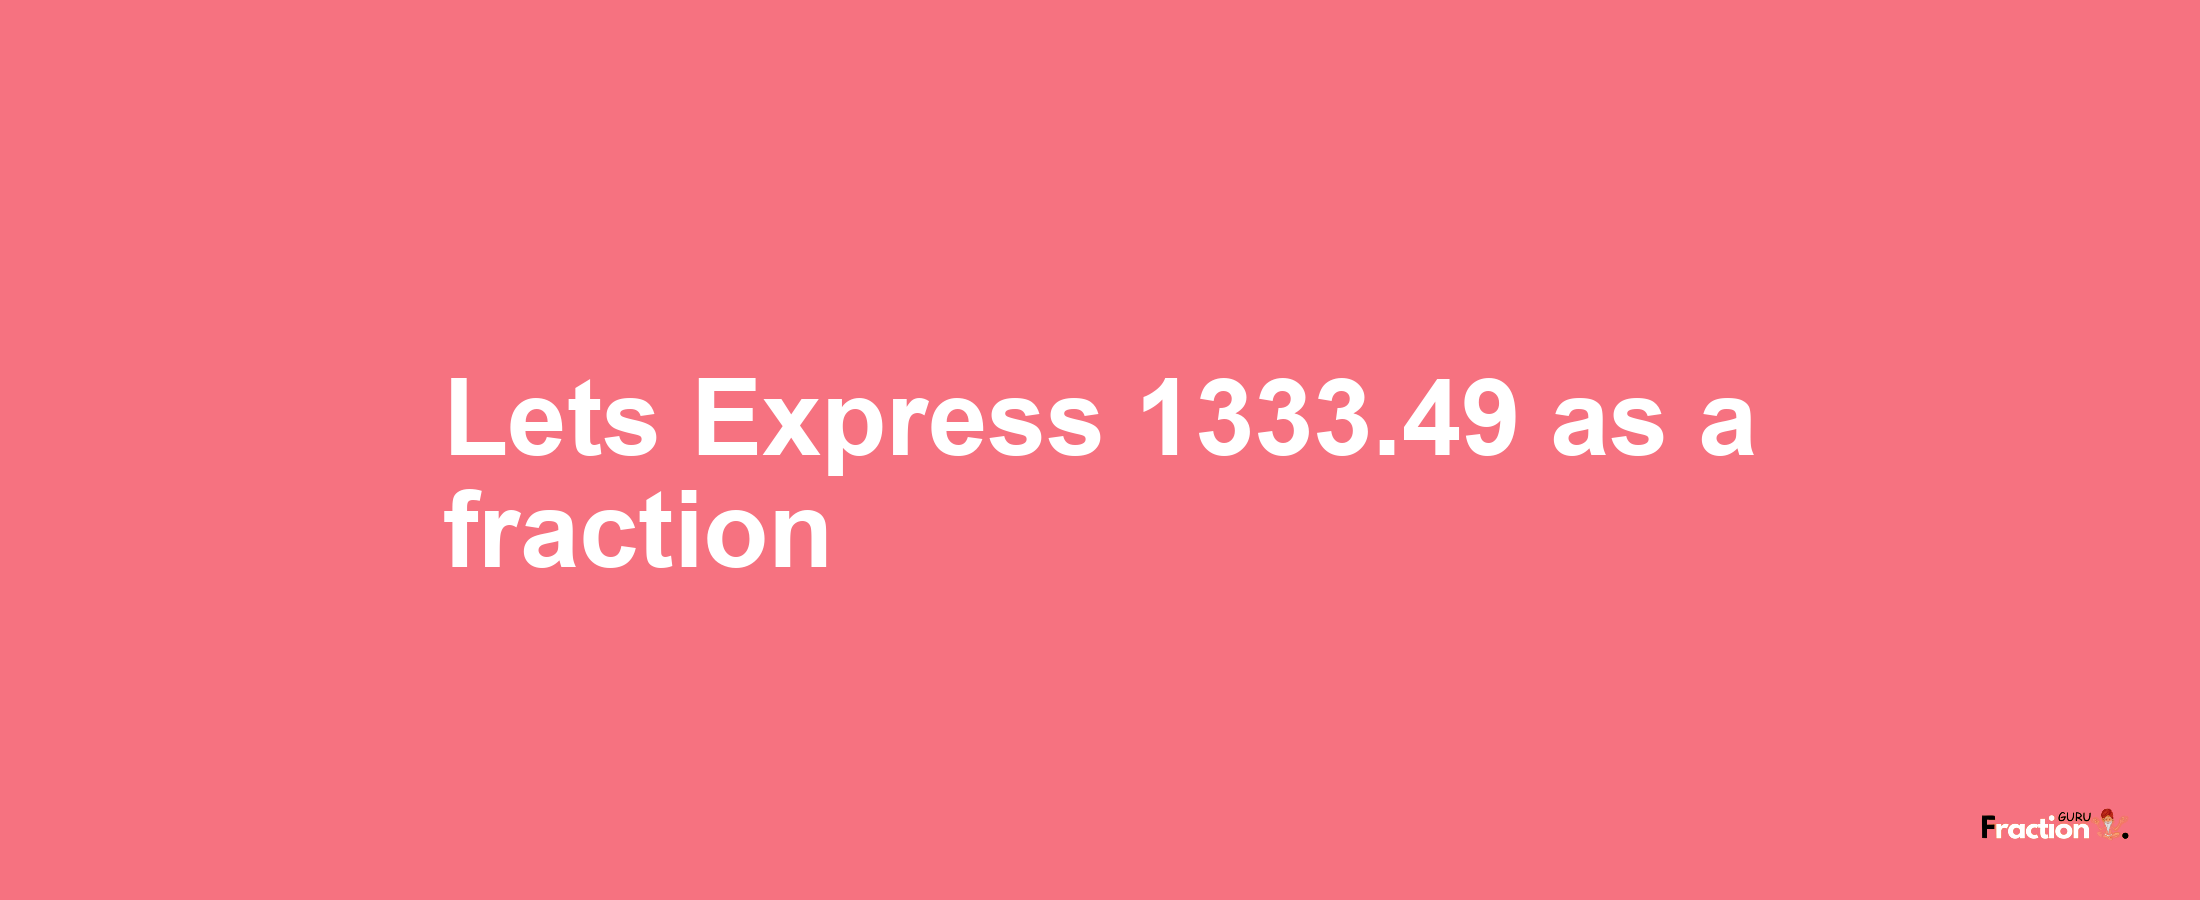 Lets Express 1333.49 as afraction